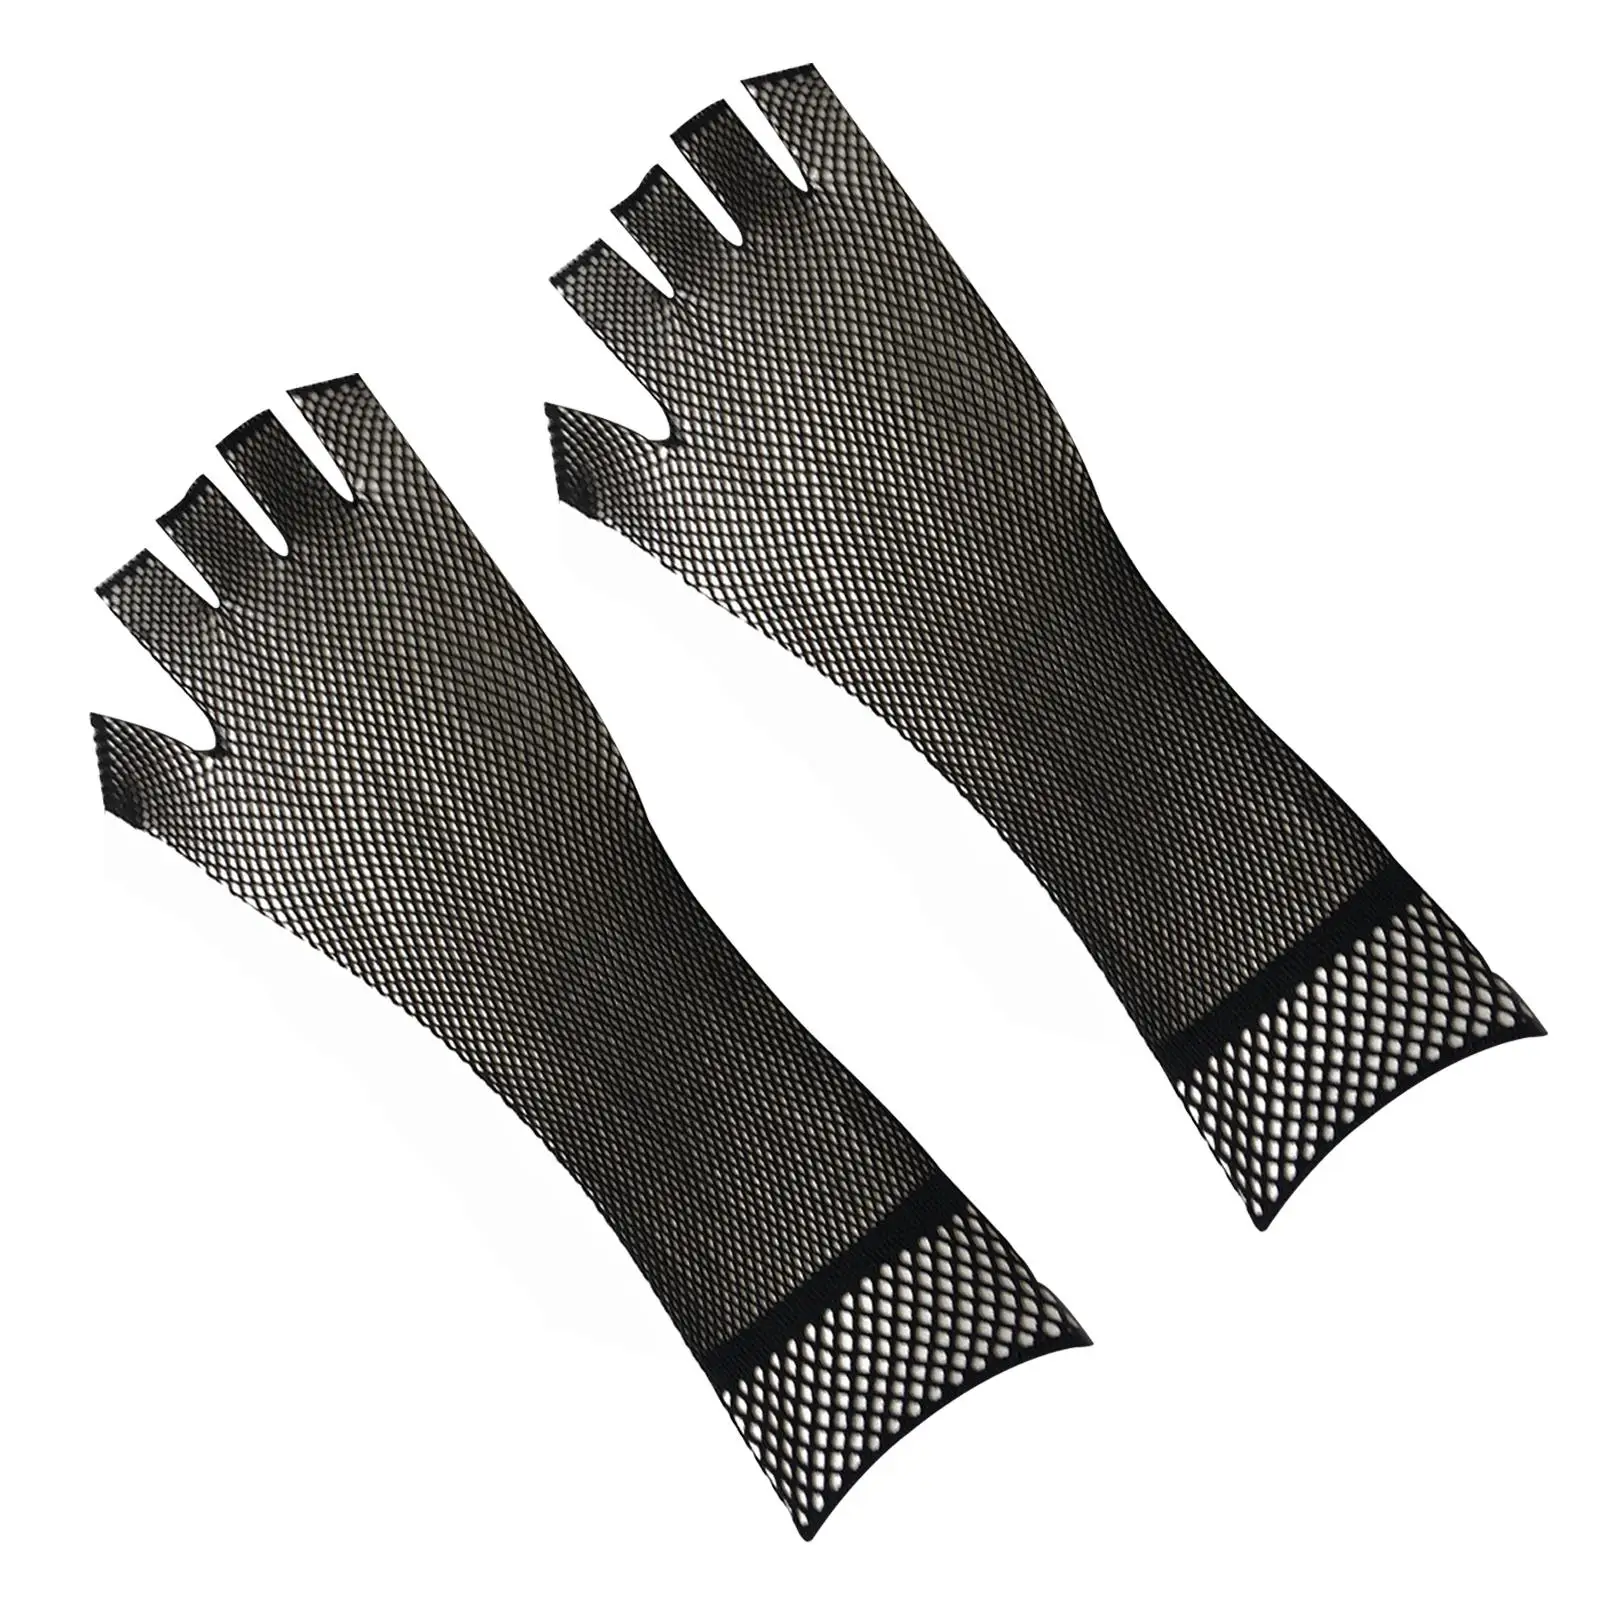 Punk Fishnet Long Gloves Mittens Accessory Mesh Elbow Length Nylon Gothic for Ladies Party Cosplay Costume Women